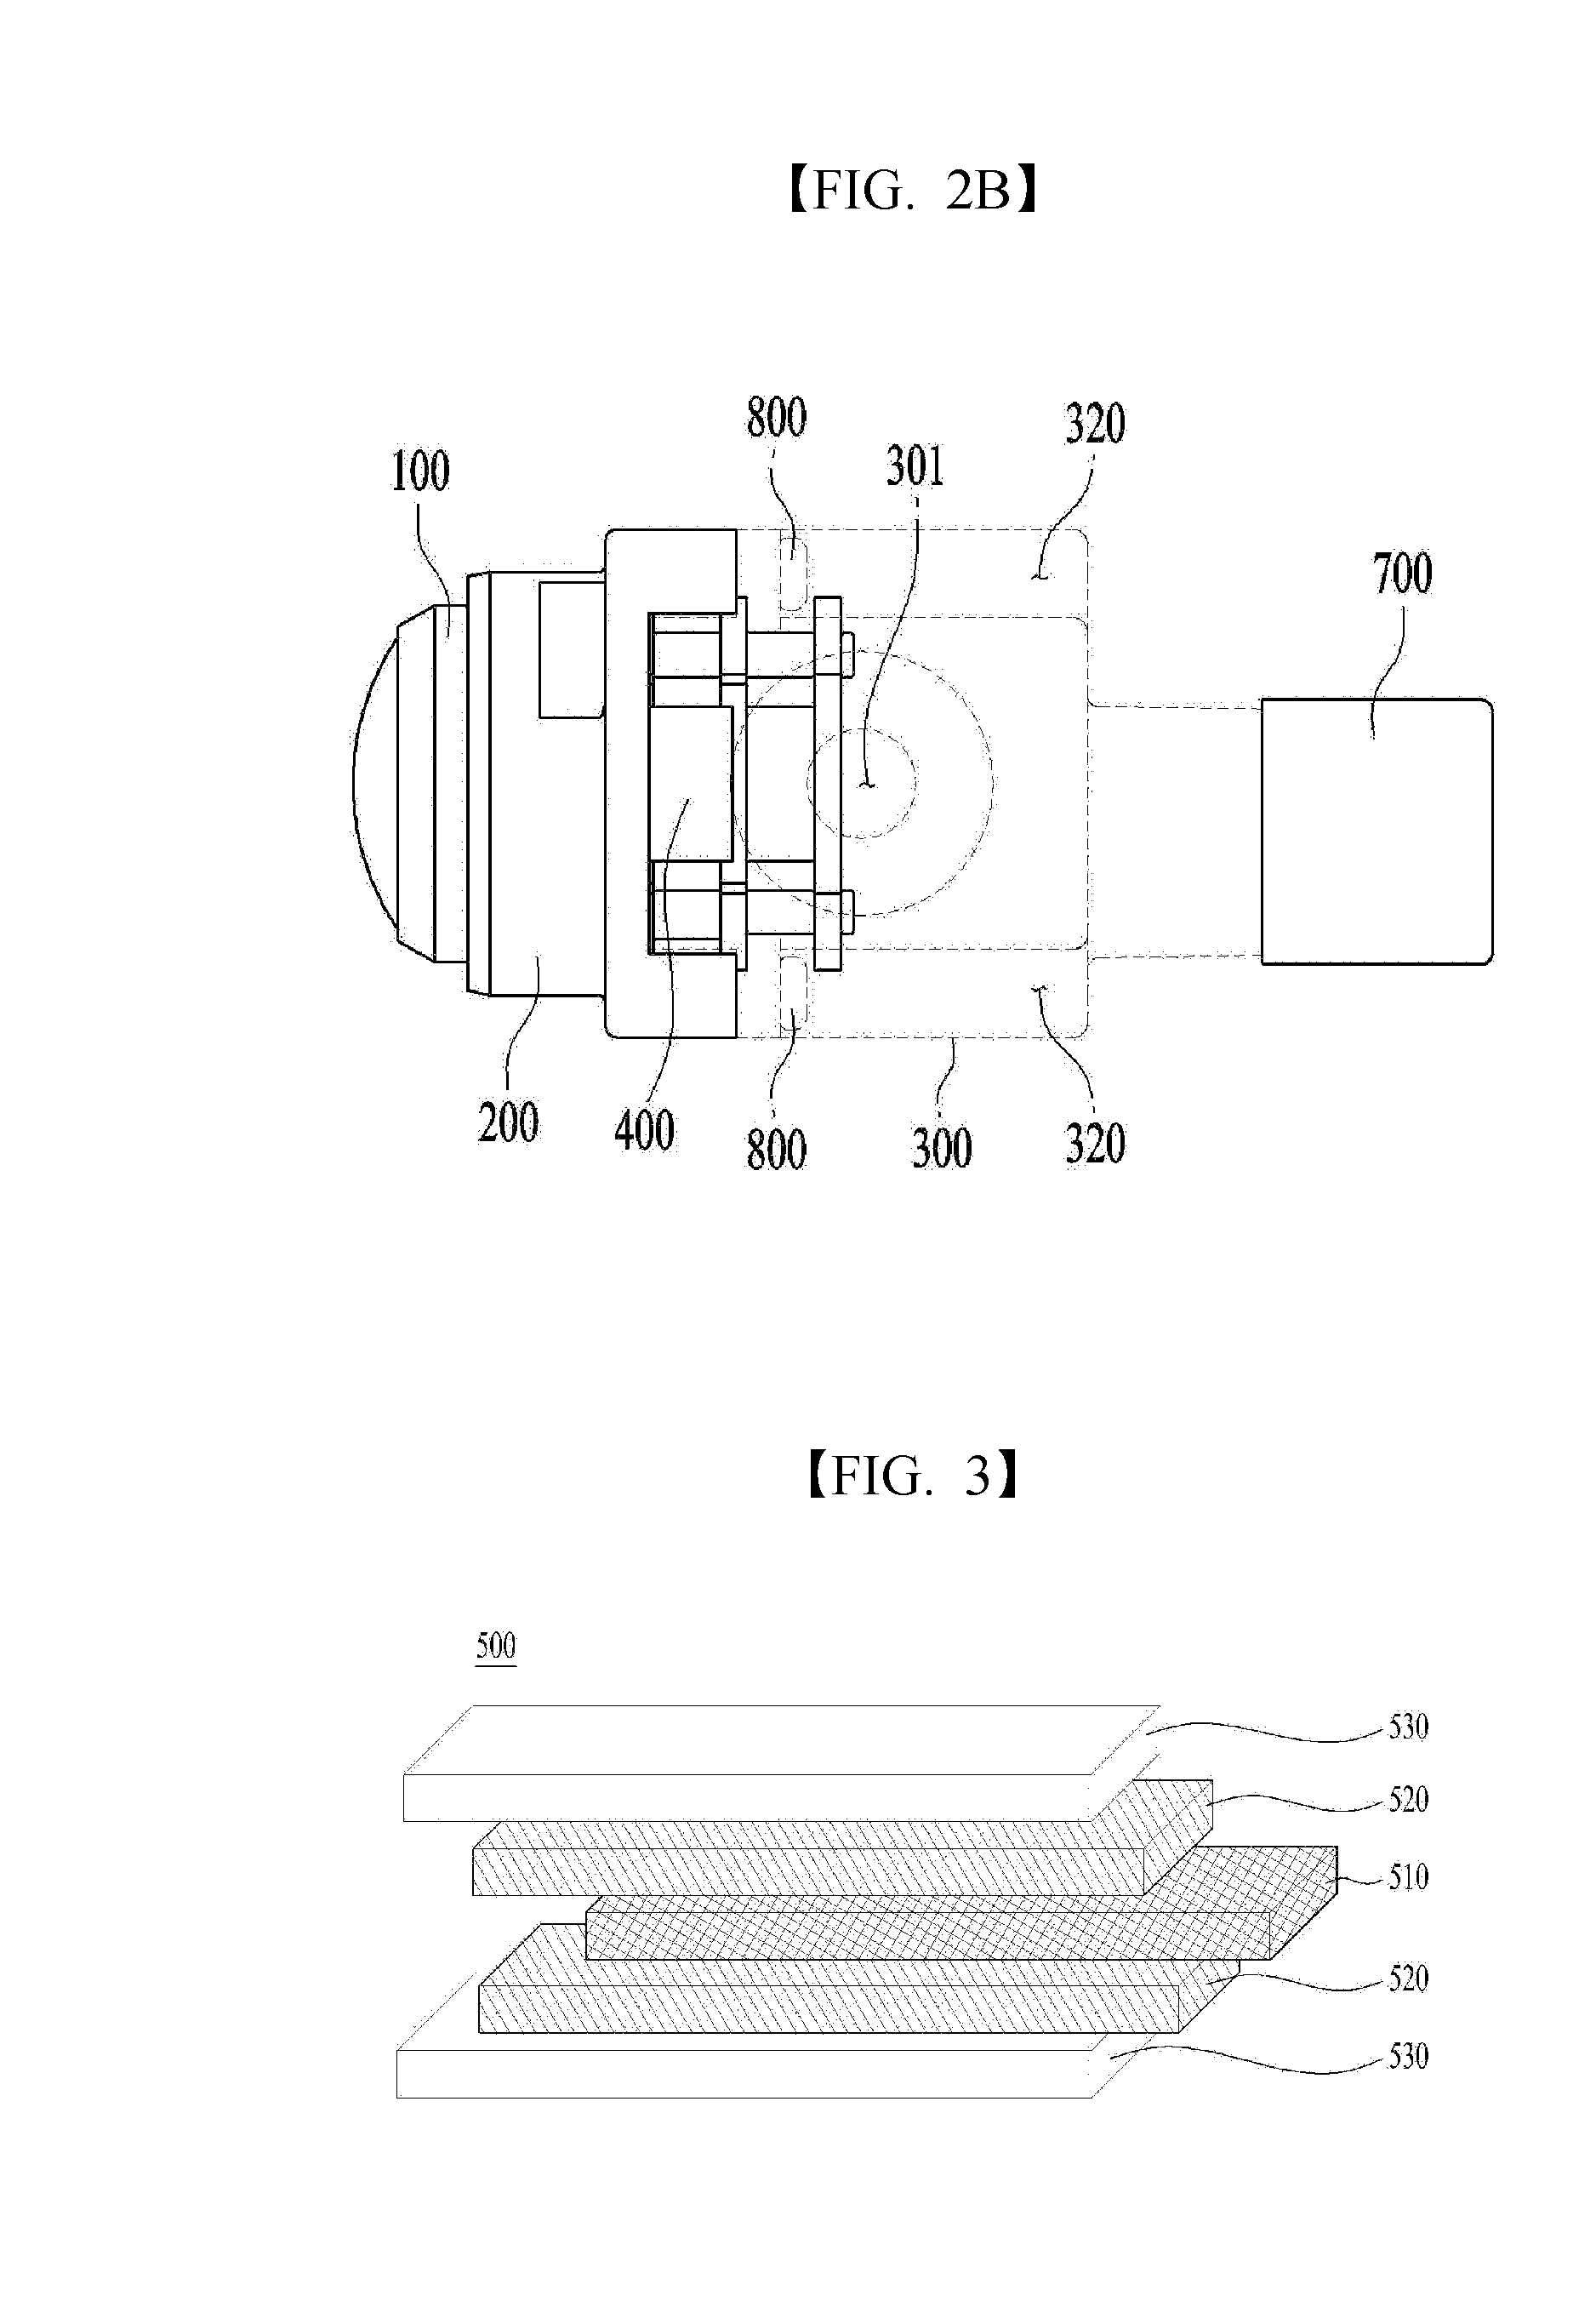 Camera Module for Vehicle